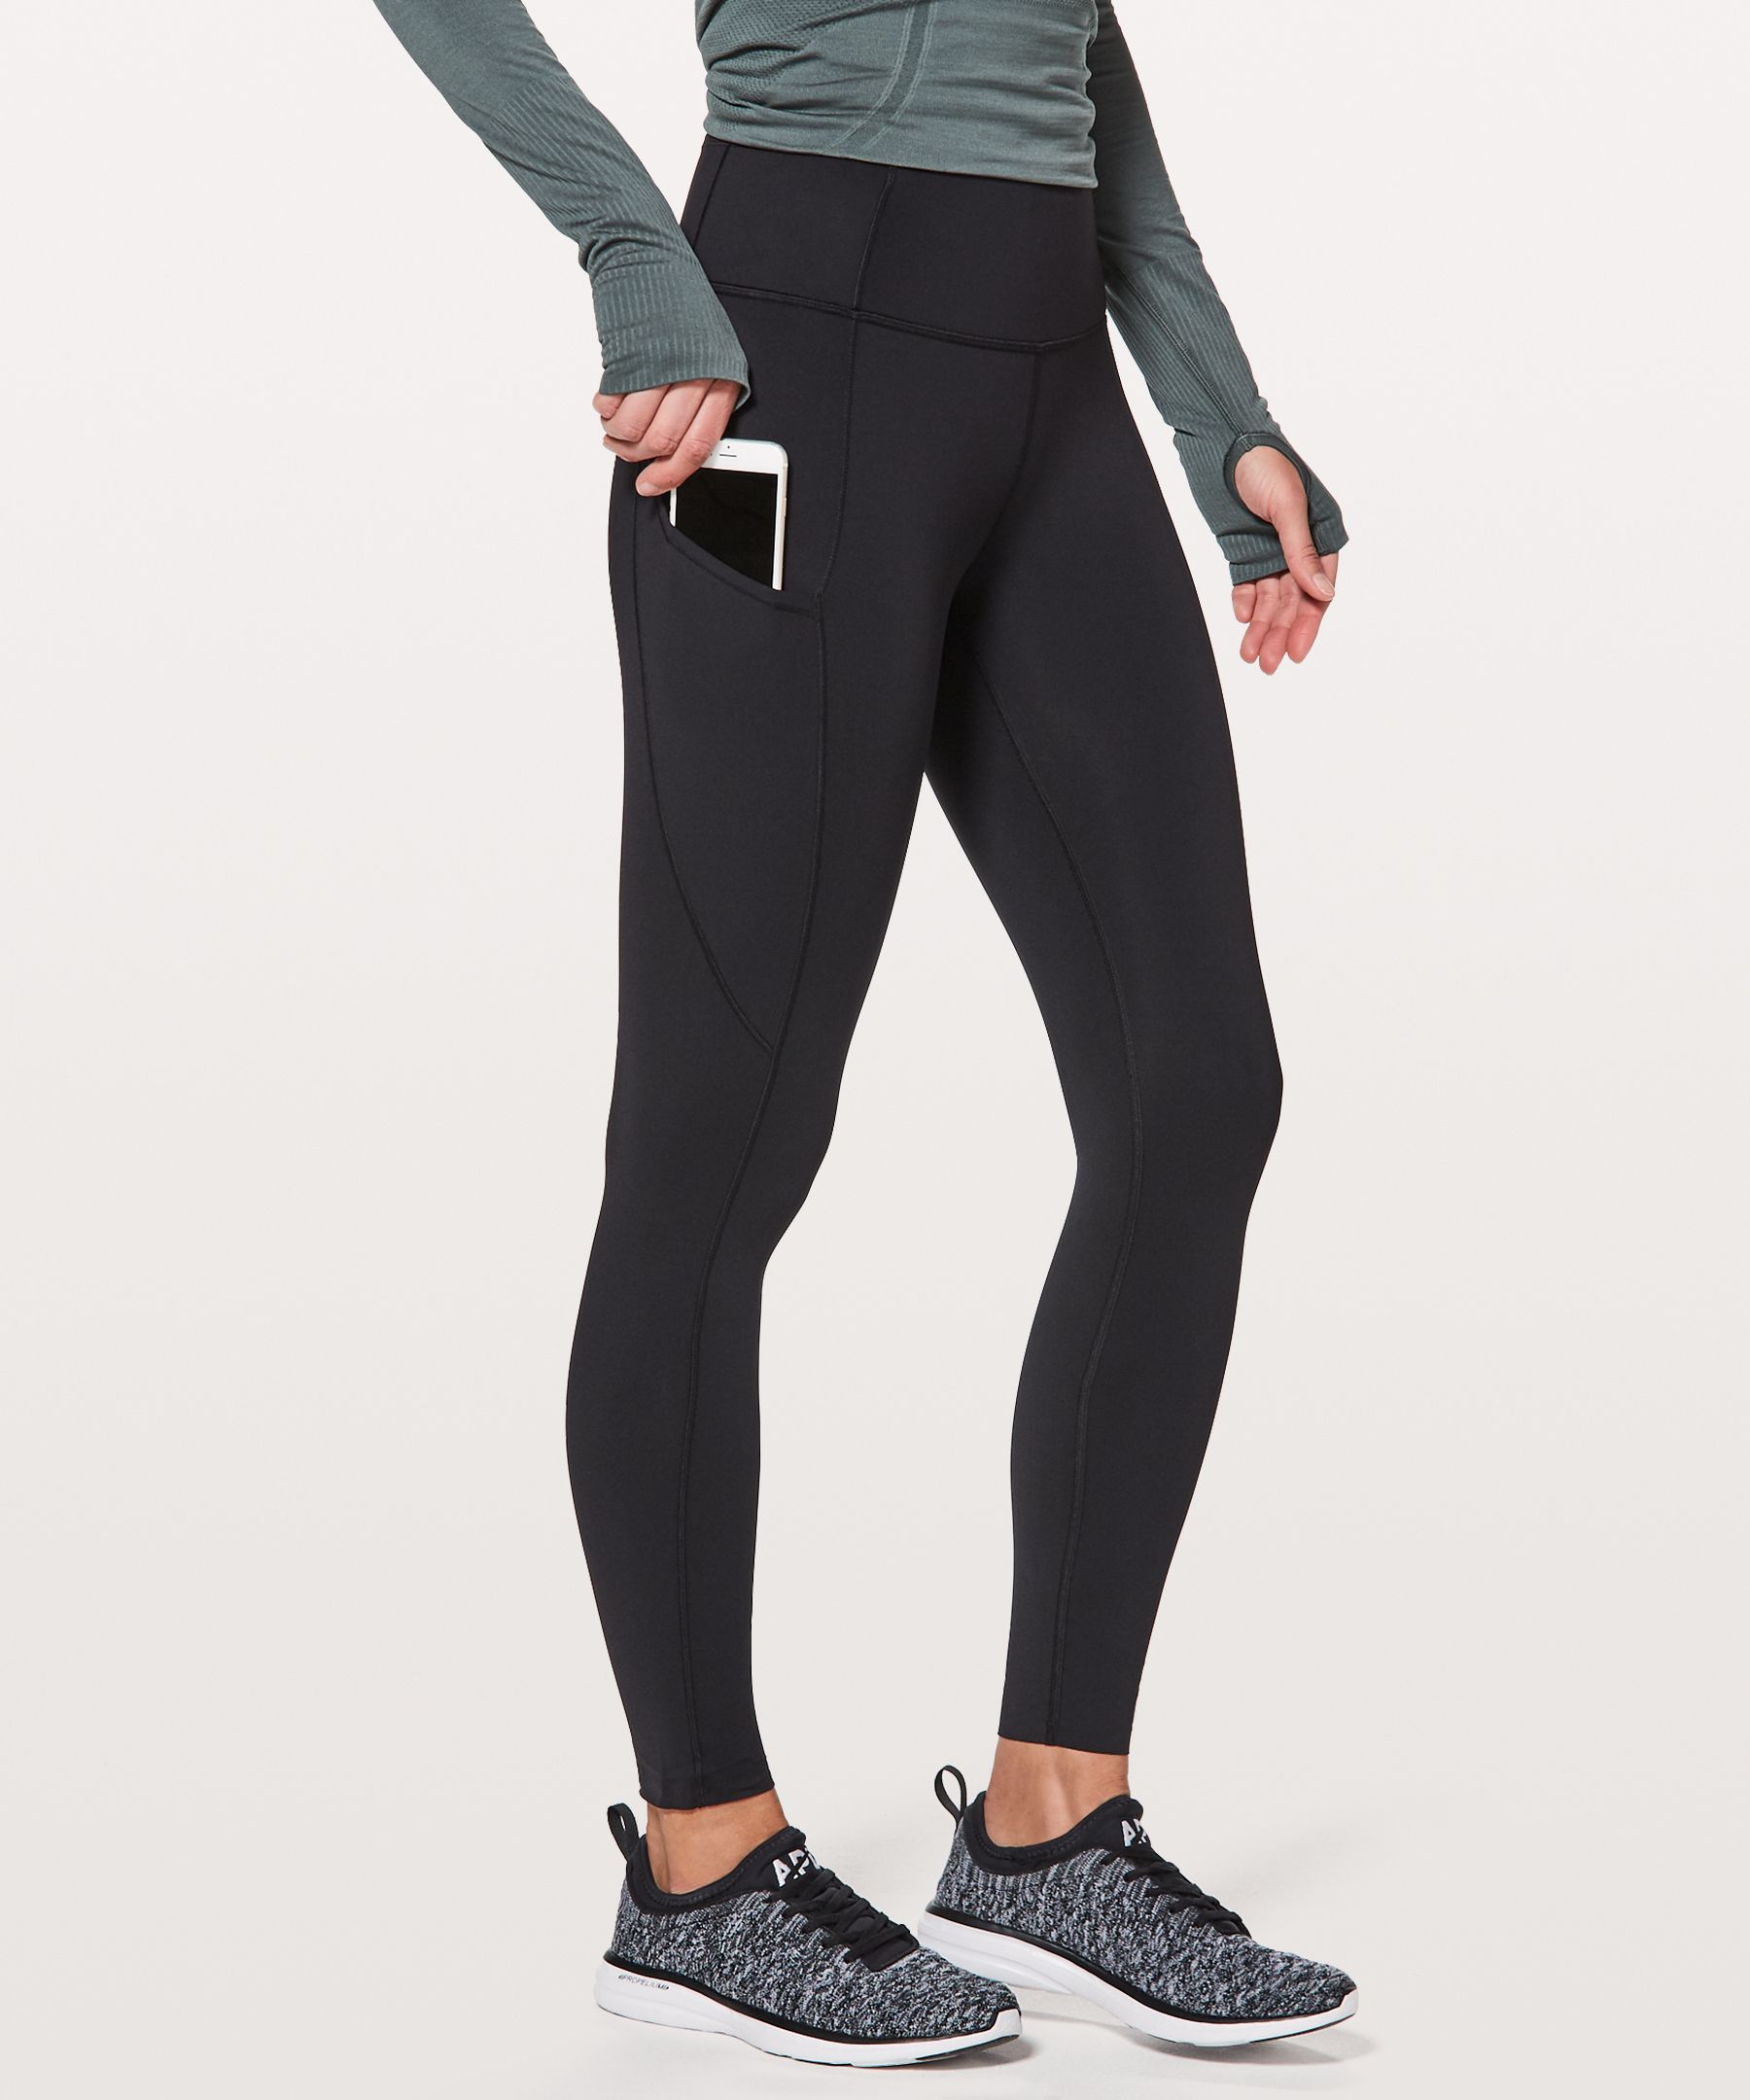 Lululemon Fast And Free High-rise Tights 25"